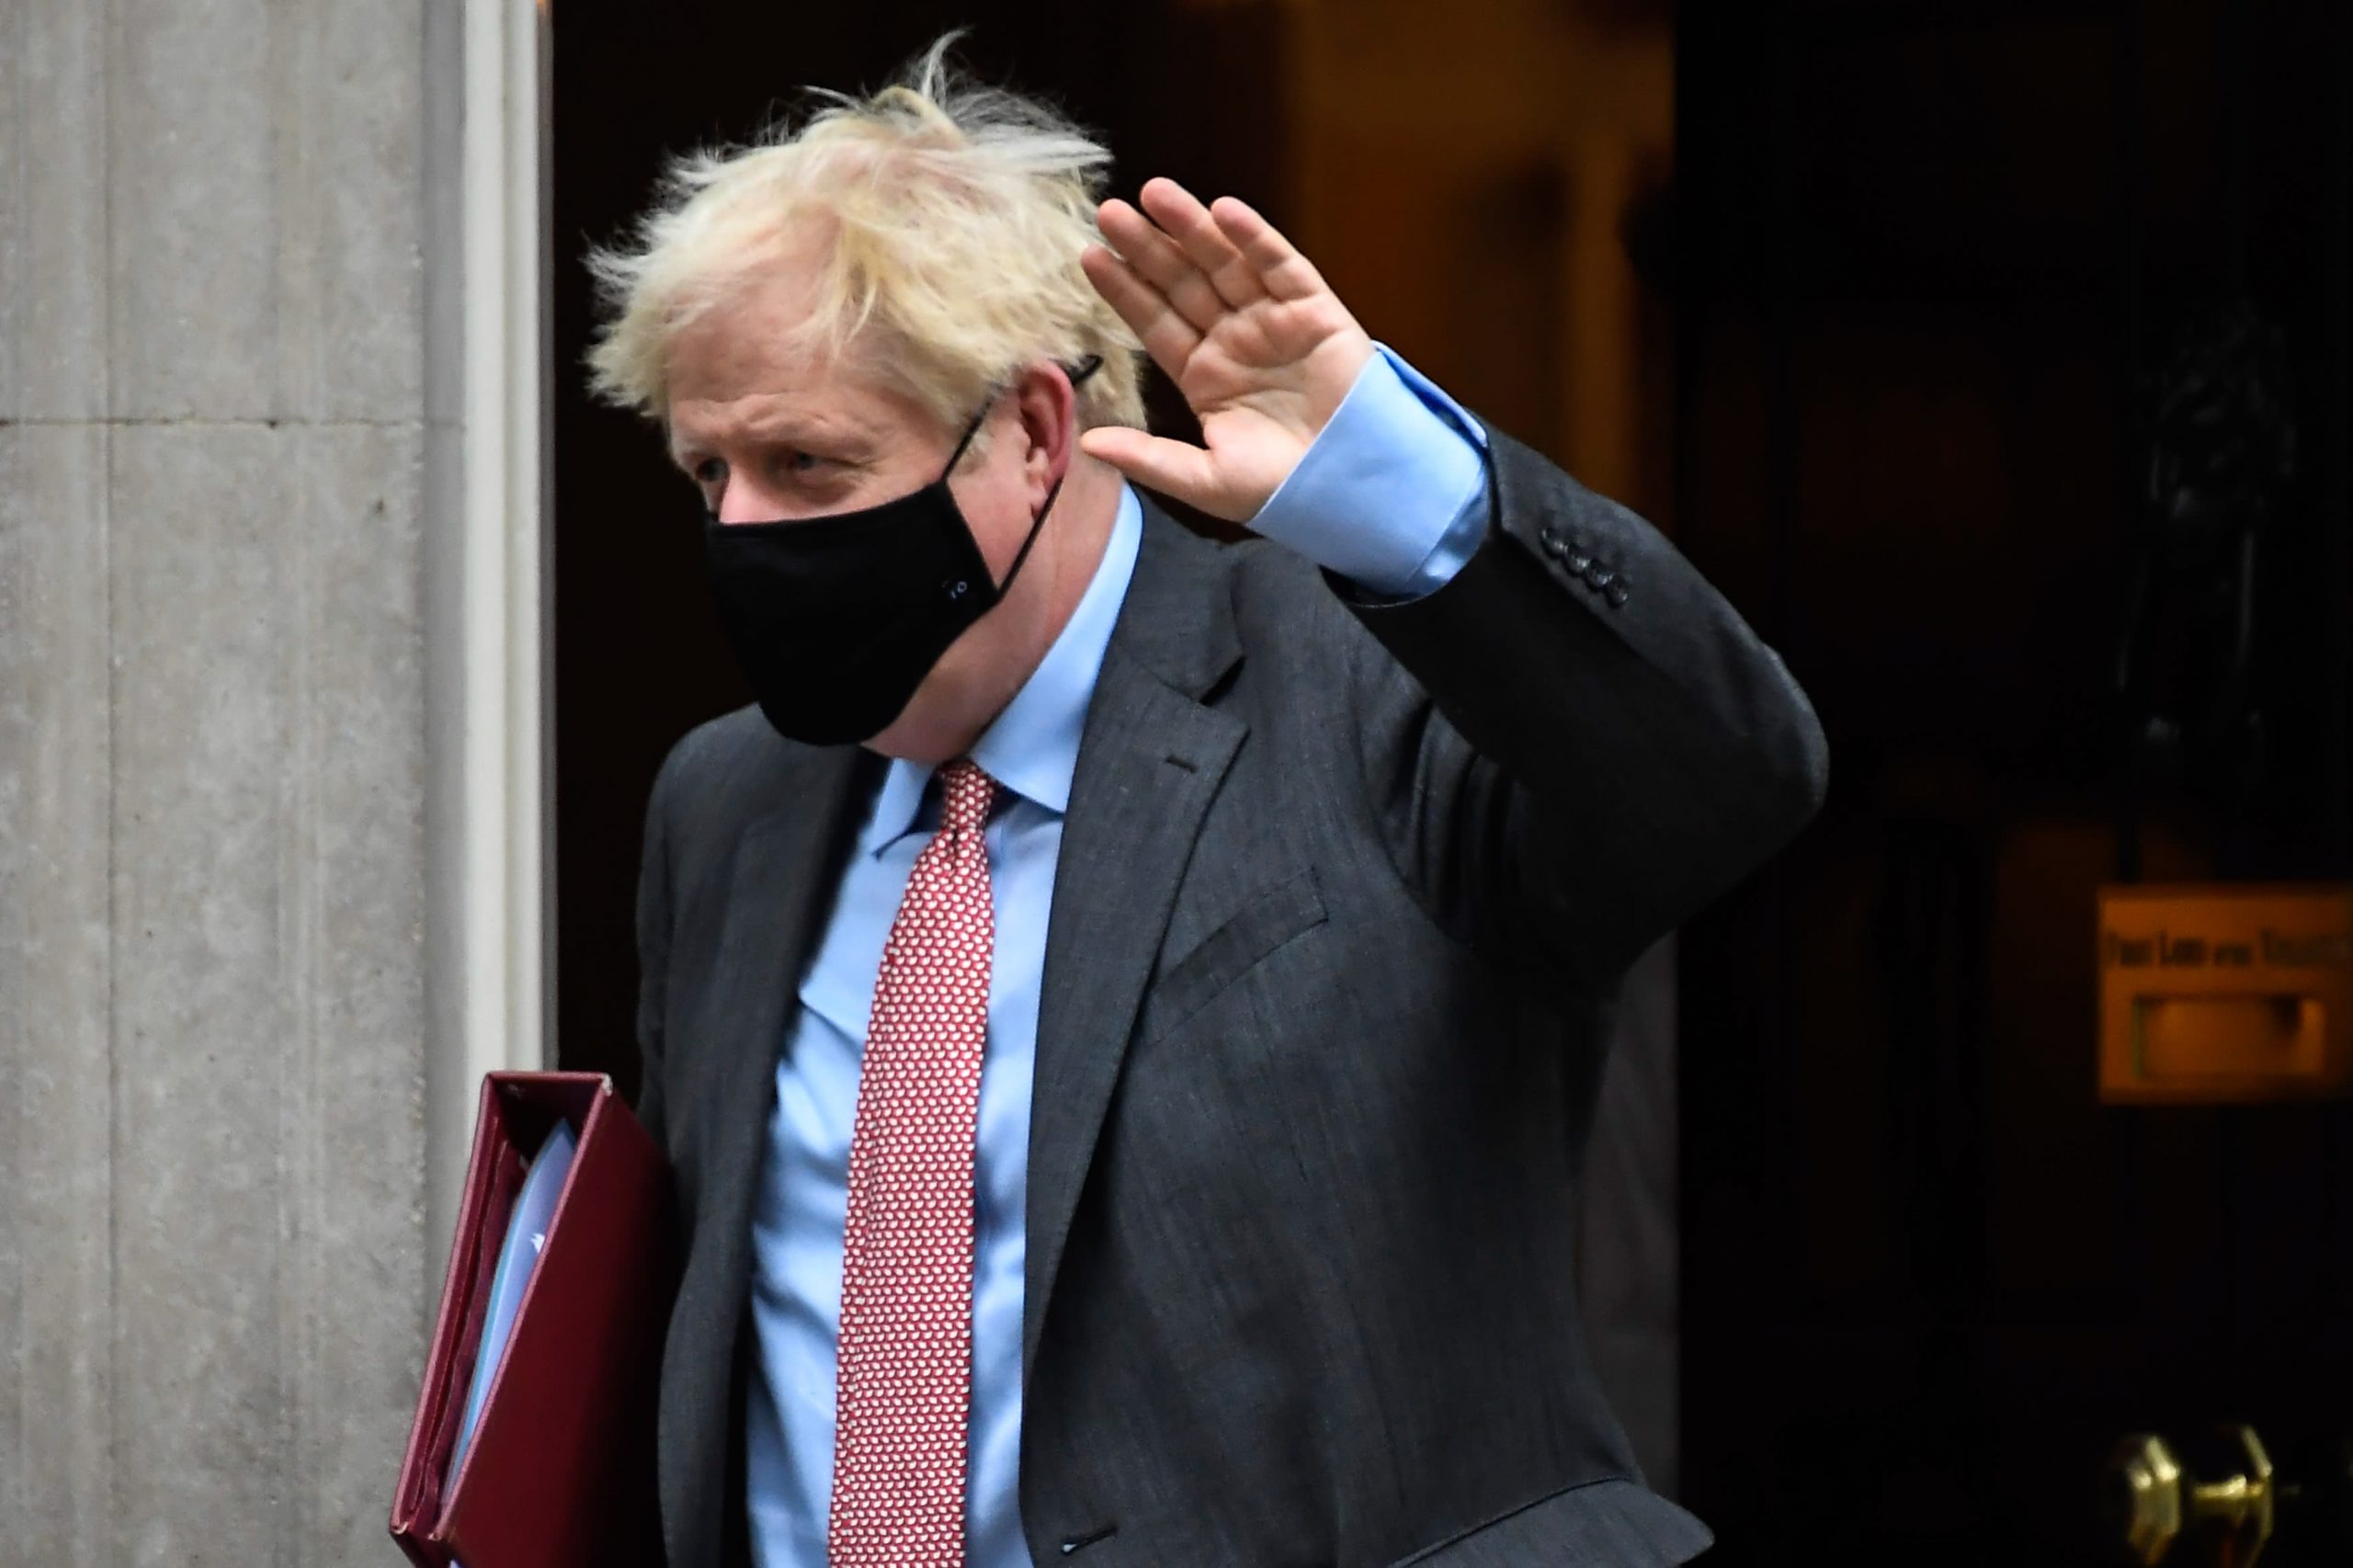 Prime Minister Boris Johnson urges Britain to follow rules to avoid being locked up